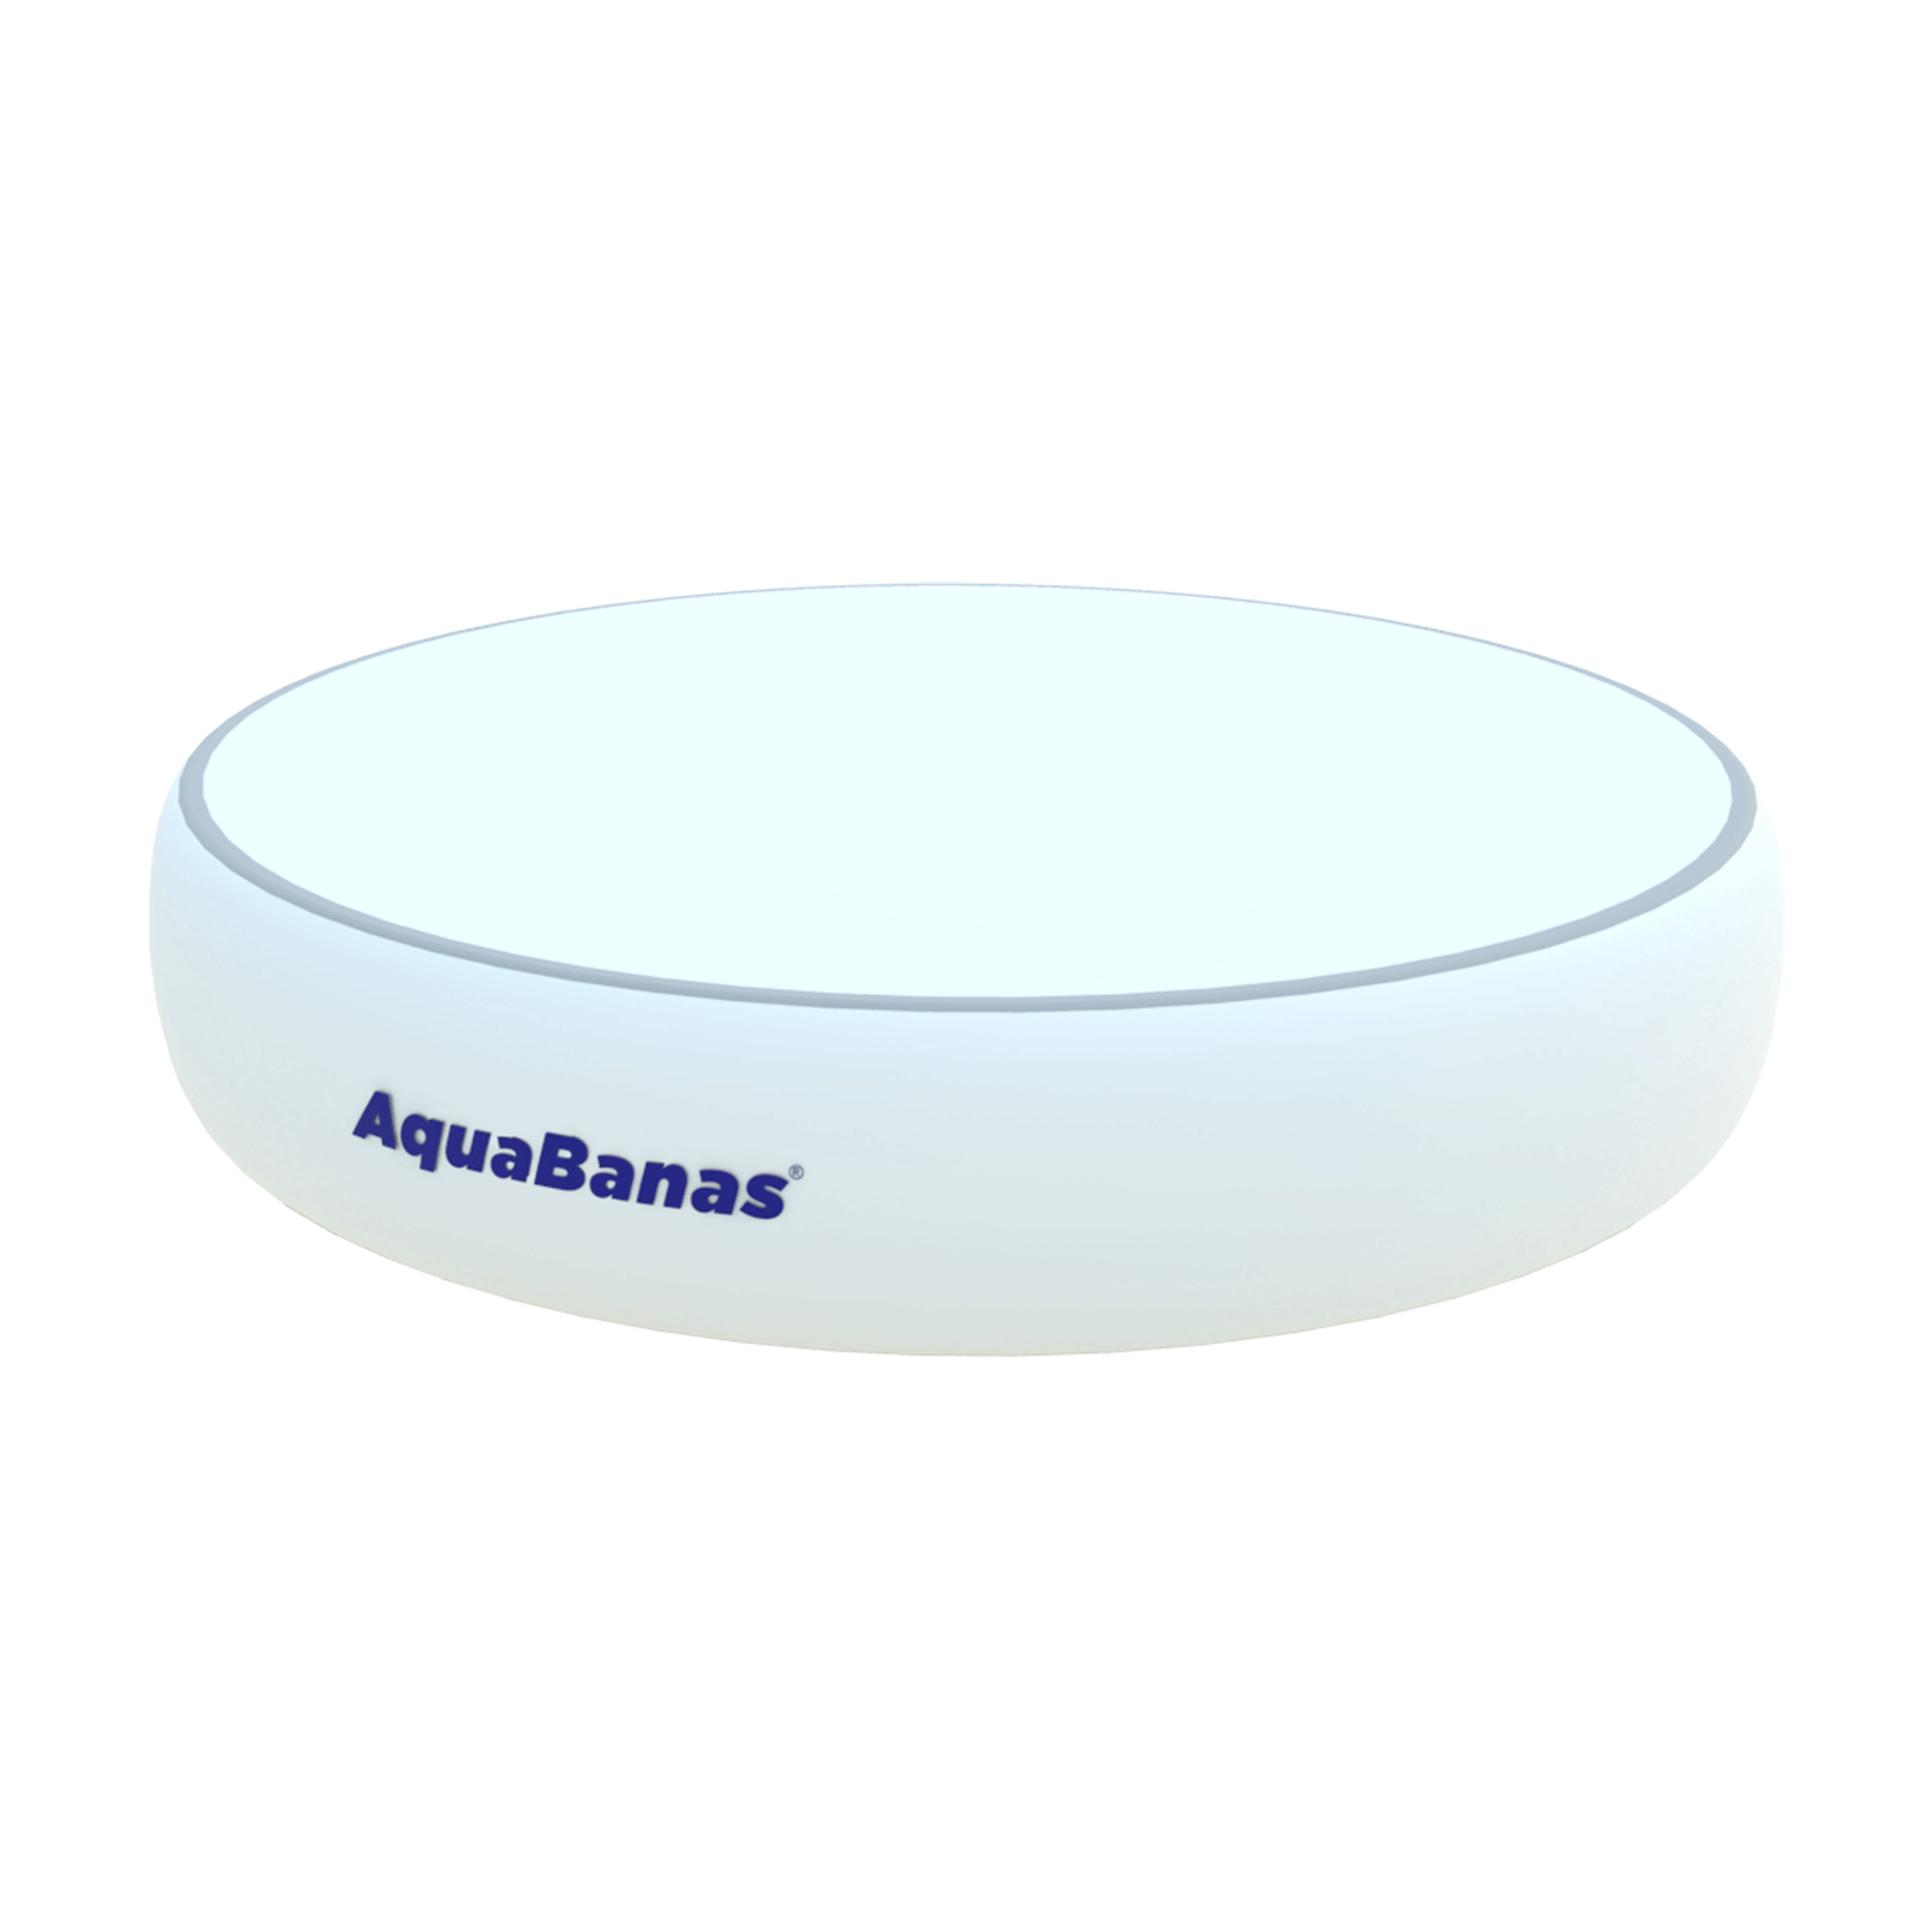 aquabanas-product-couch-bana-floating-table.png